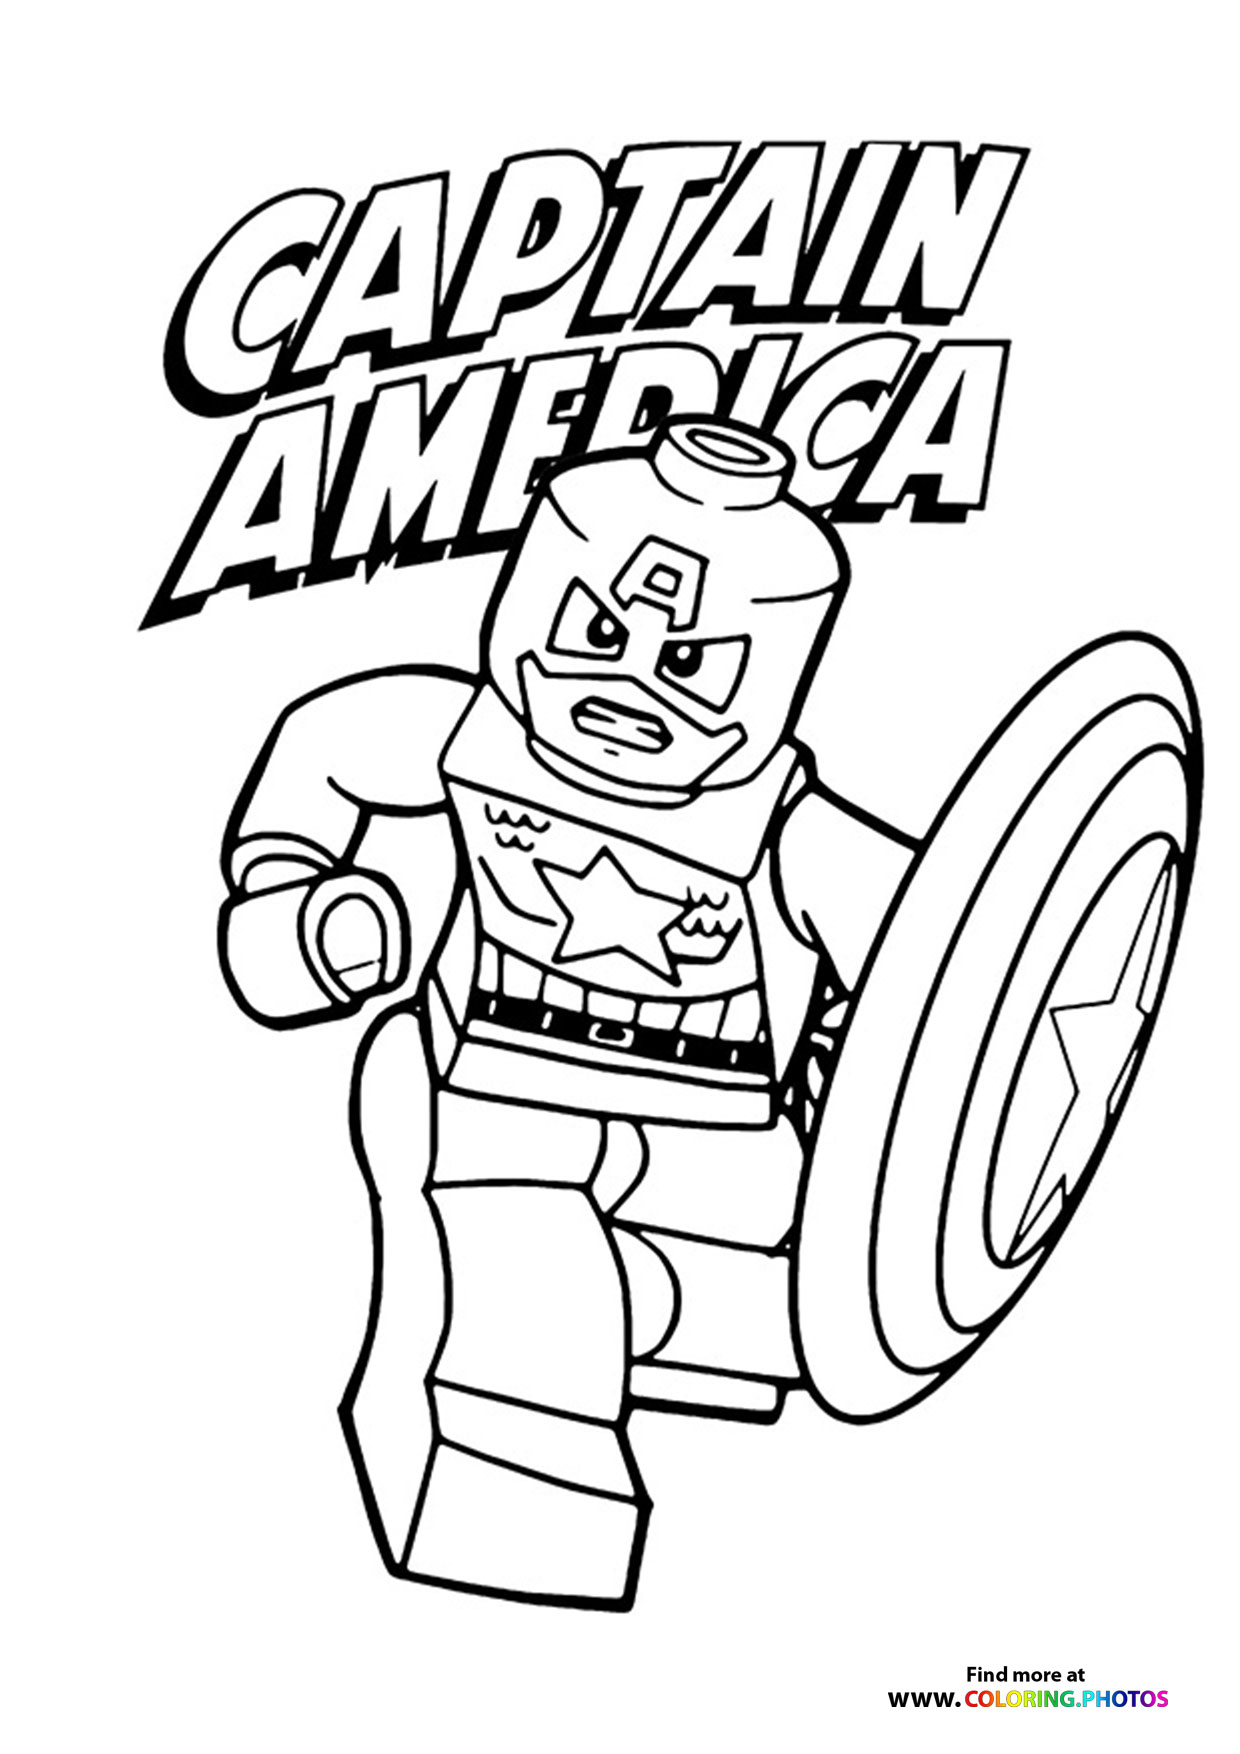 LEGO Captain America Coloring Page